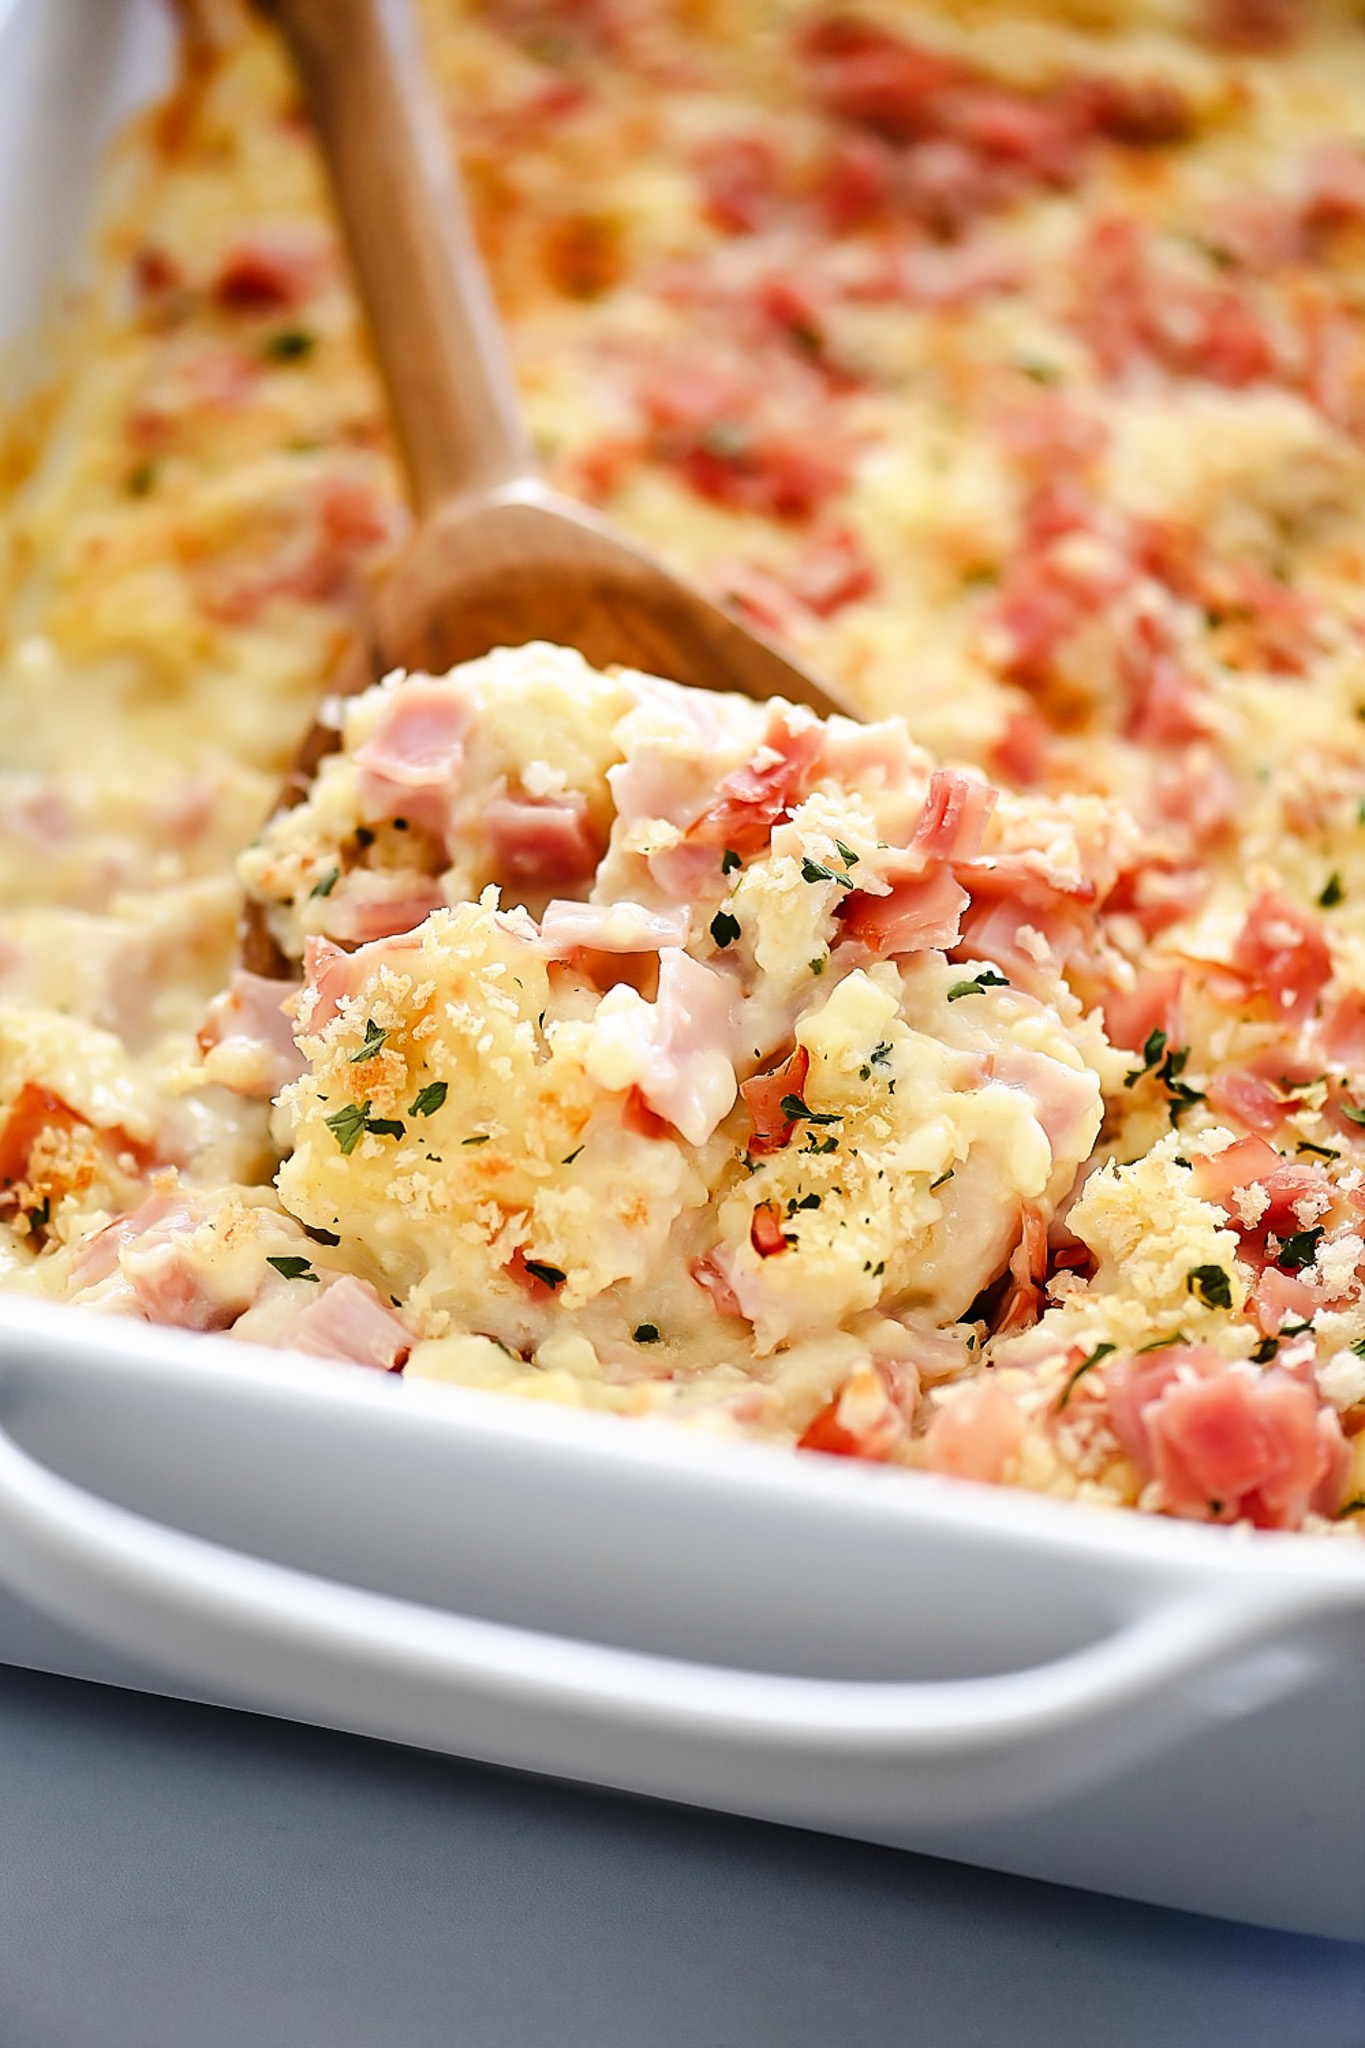 Chicken Cordon Bleu Casserole has all the flavors of traditional and delicious Chicken Cordon Bleu but in casserole form. Life-in-the-Lofthouse.com